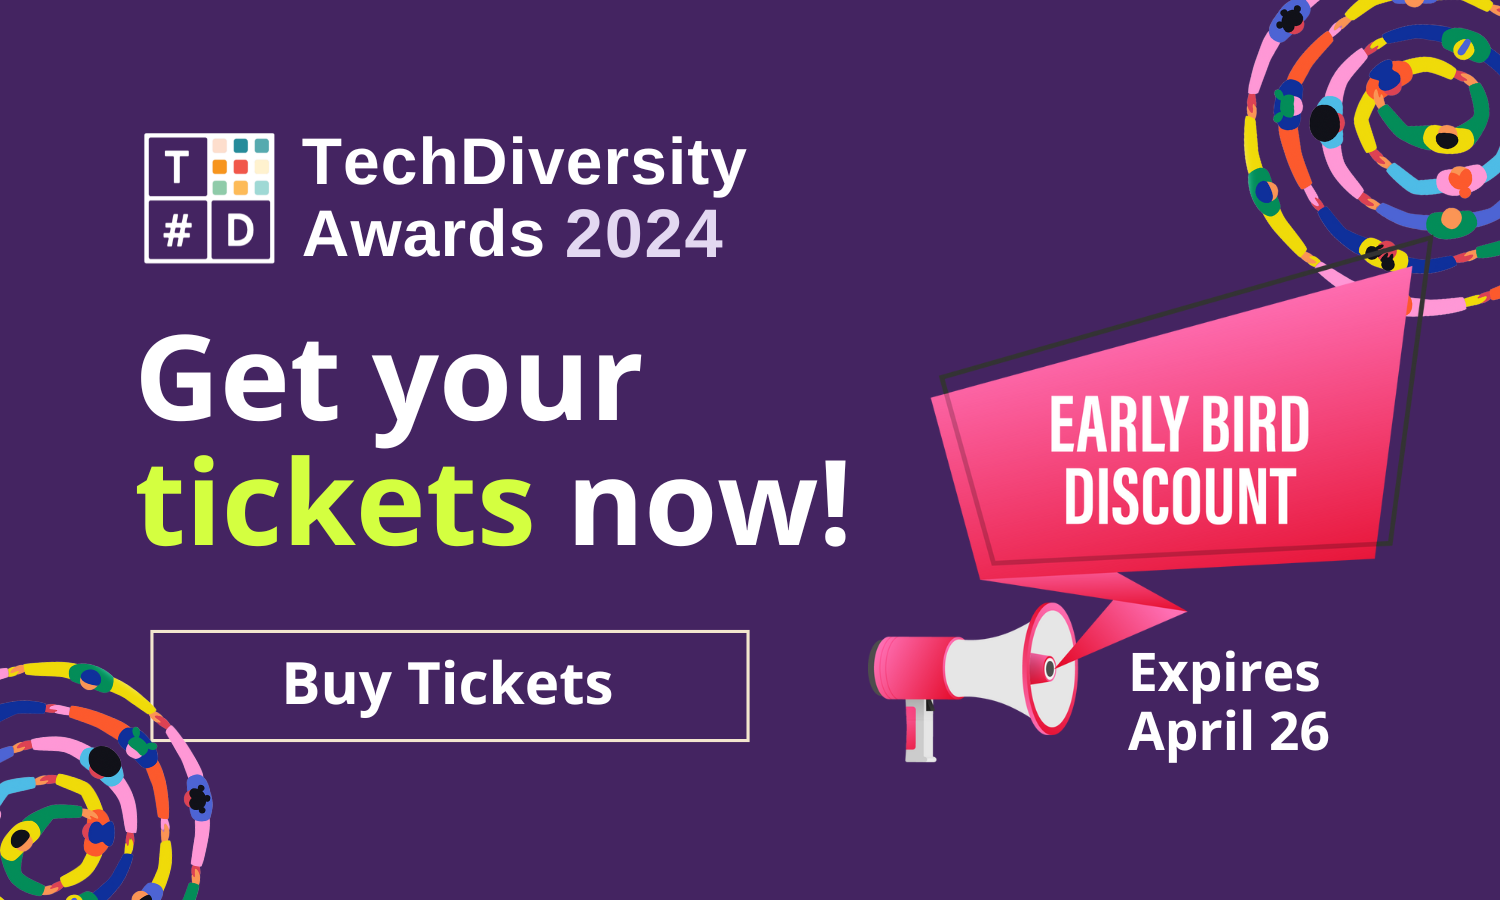 TechDiversity Awards - Get your tickets now